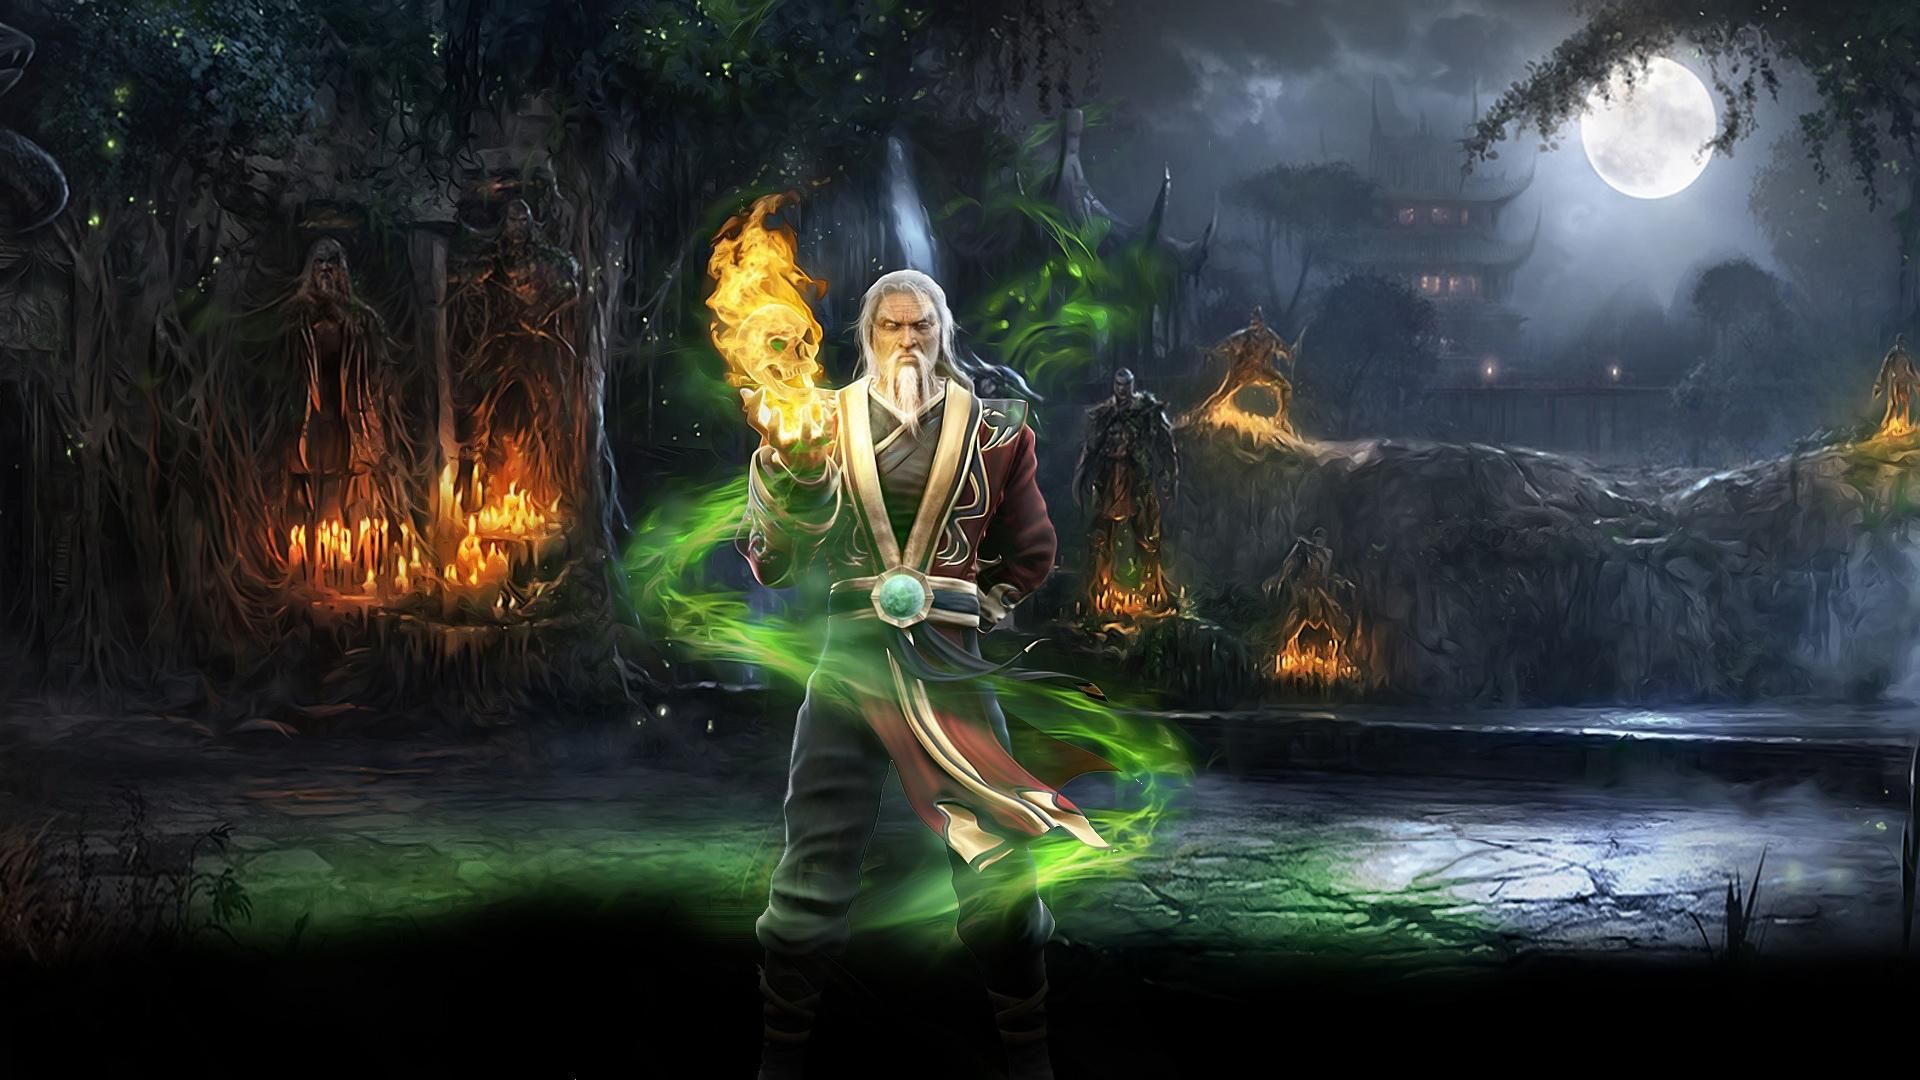 Wizard hd wallpaper 1080p for pc